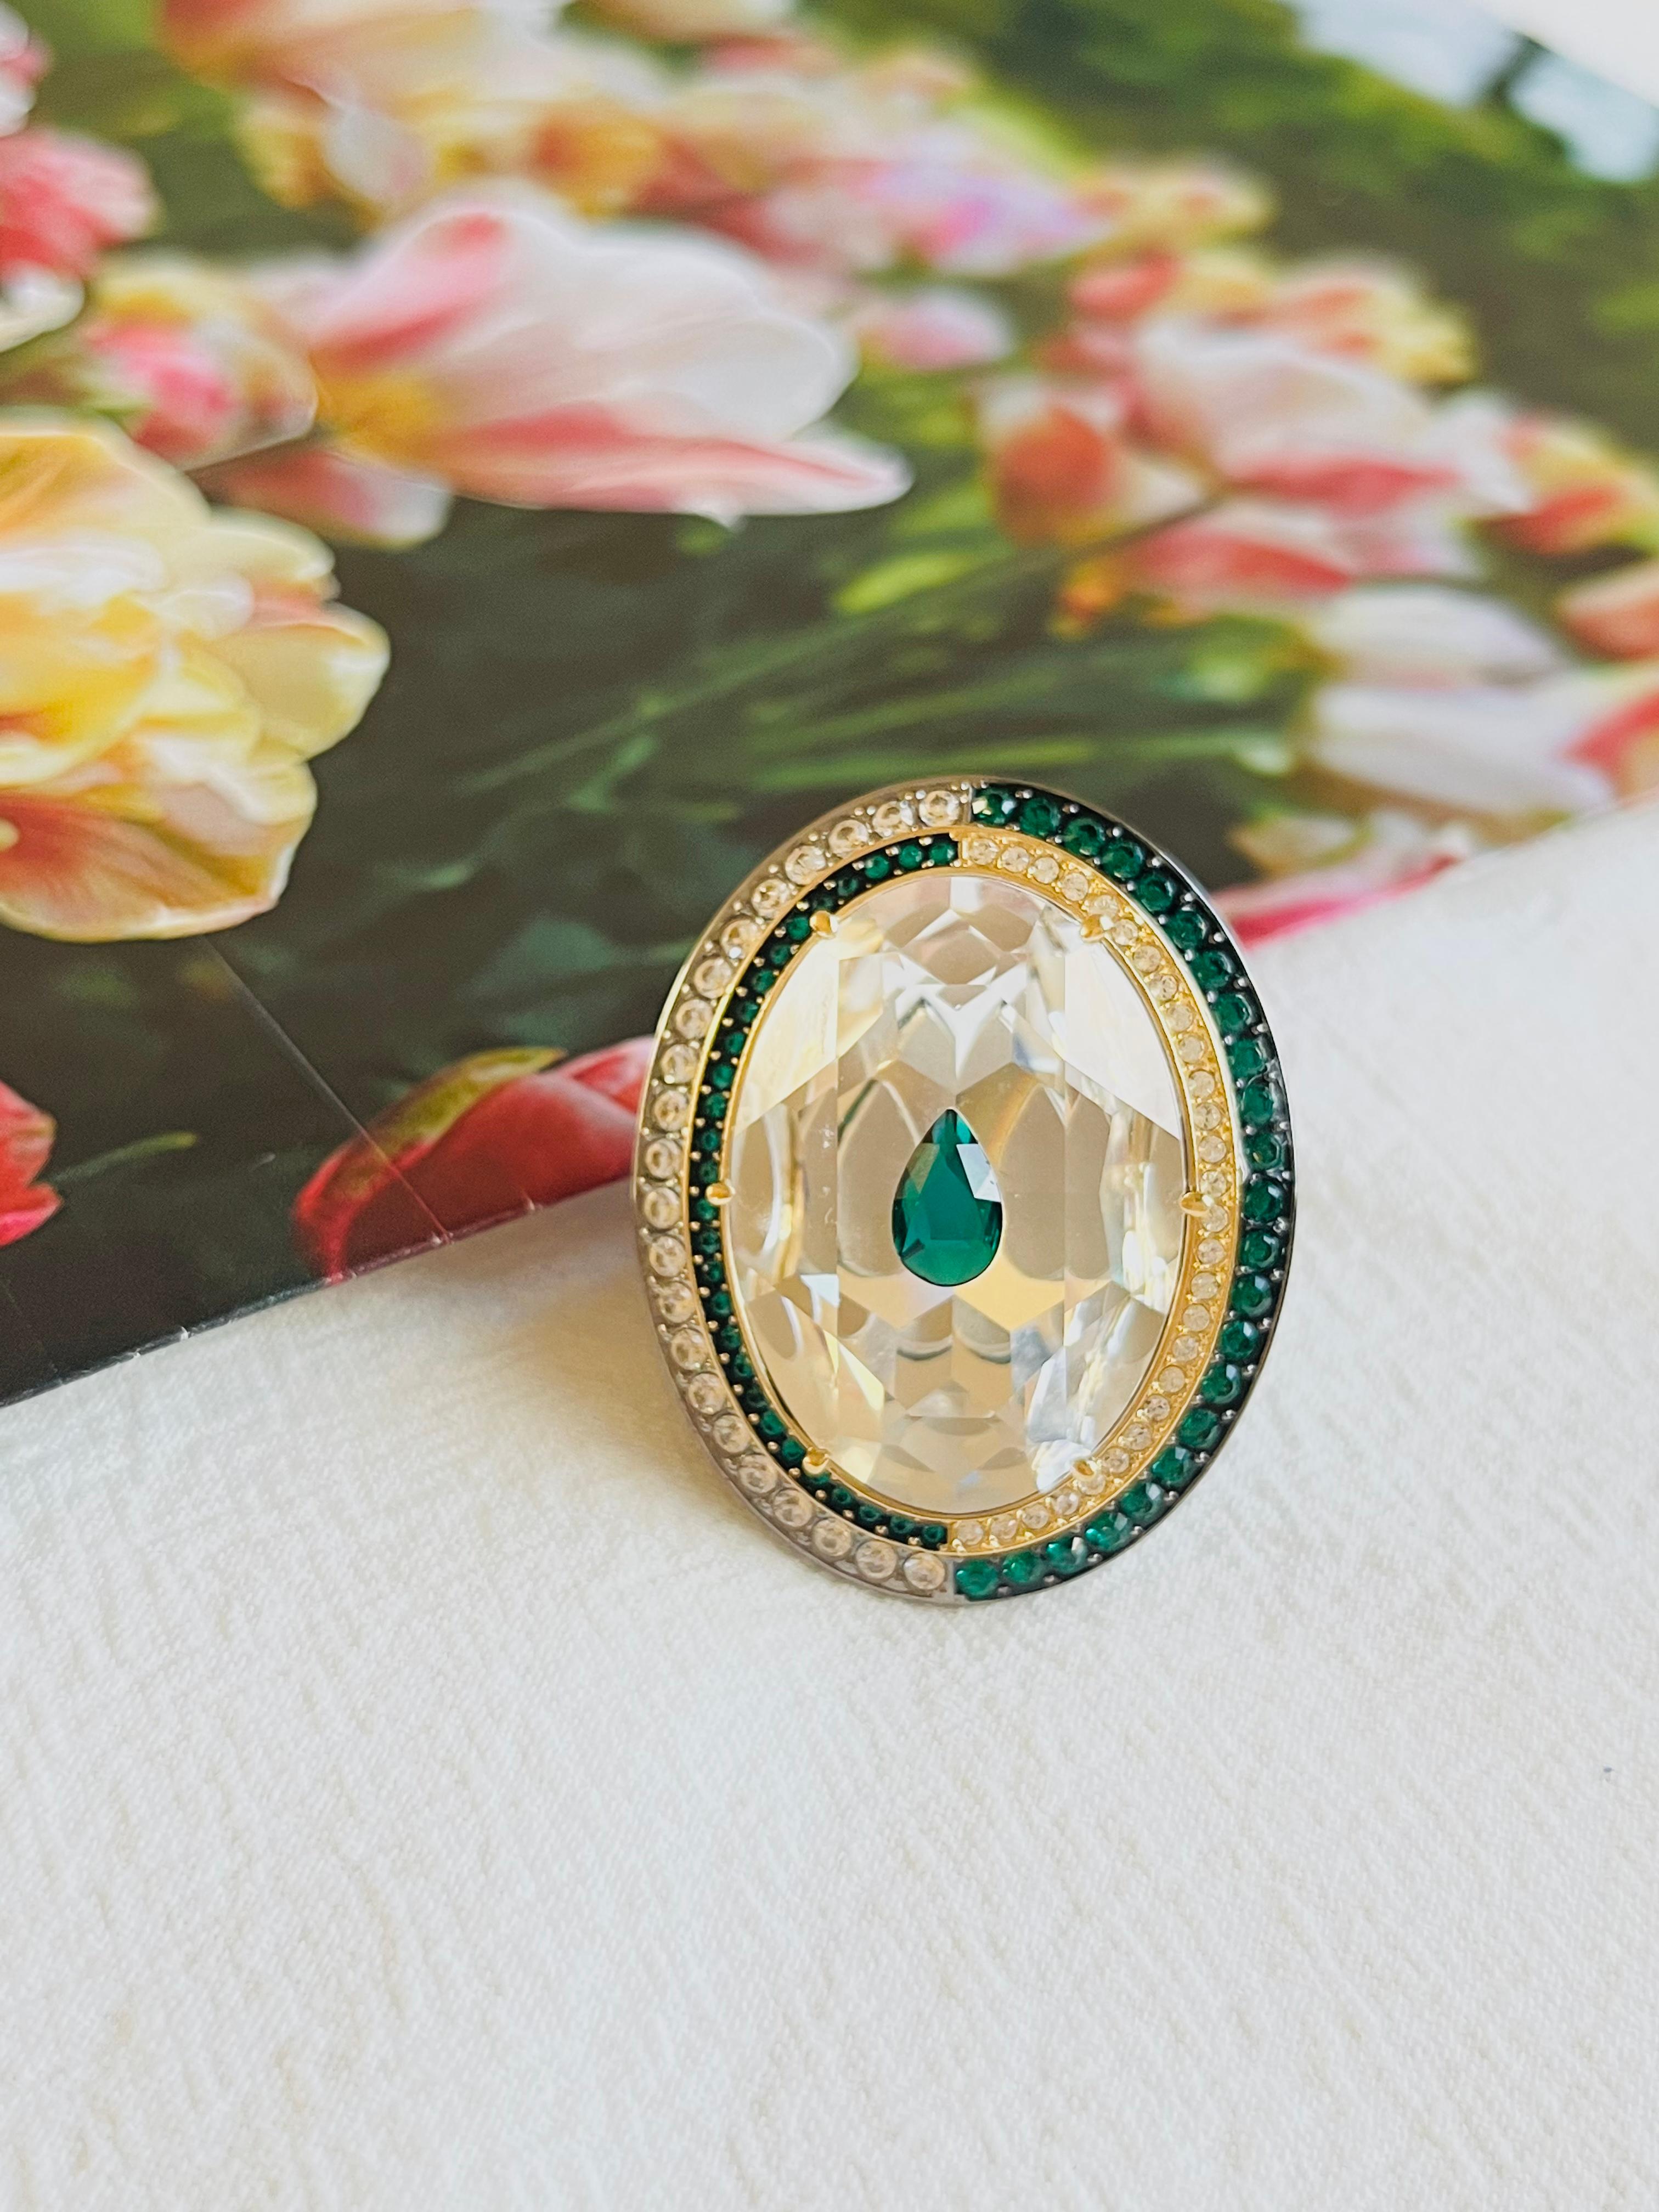 In excellent condition. With original box, certificate and tag.

It is inspired by the opulent and ornate design style of the Baroque period. Combining vintage elegance with fresh sparkle, this eye-catching cocktail ring is embellished with clear